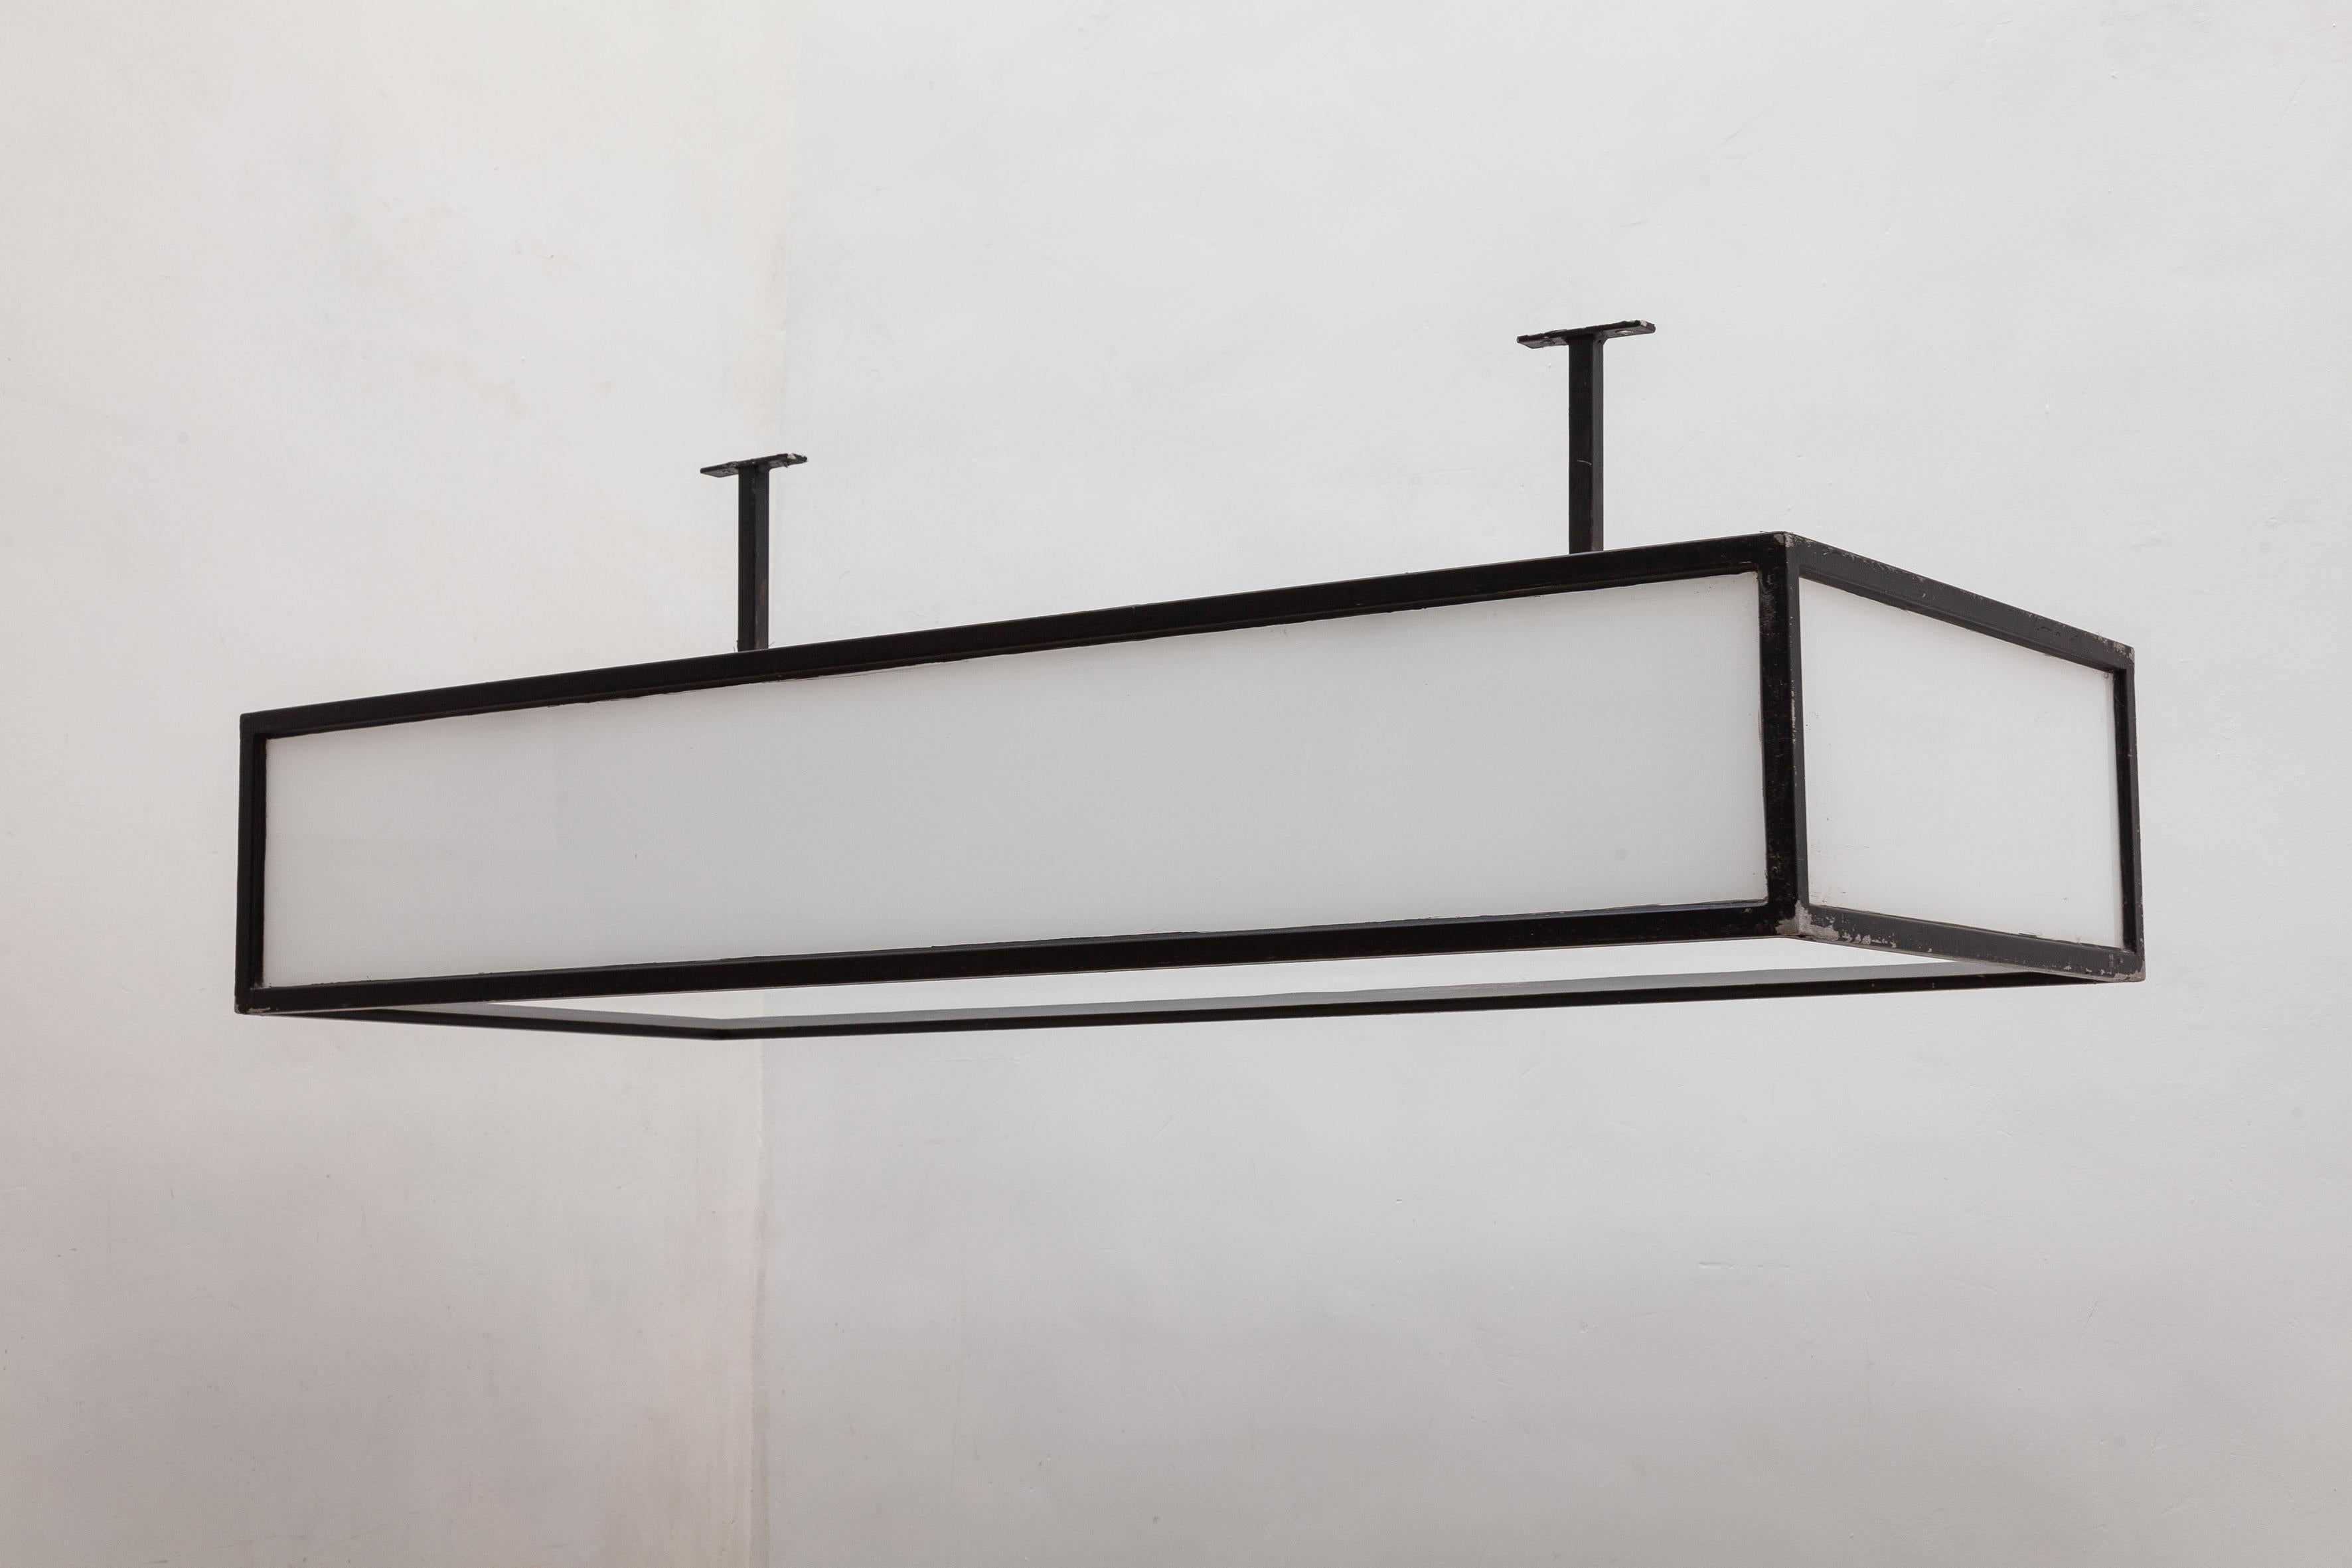 Bauhaus style large ceiling light or wall light, black and white light fixture. White opaline glass box with an iron frame. The frame has been painted black and has a vintage patina. Lit by 2 fluorescent bulbs. Three of these square box lights are